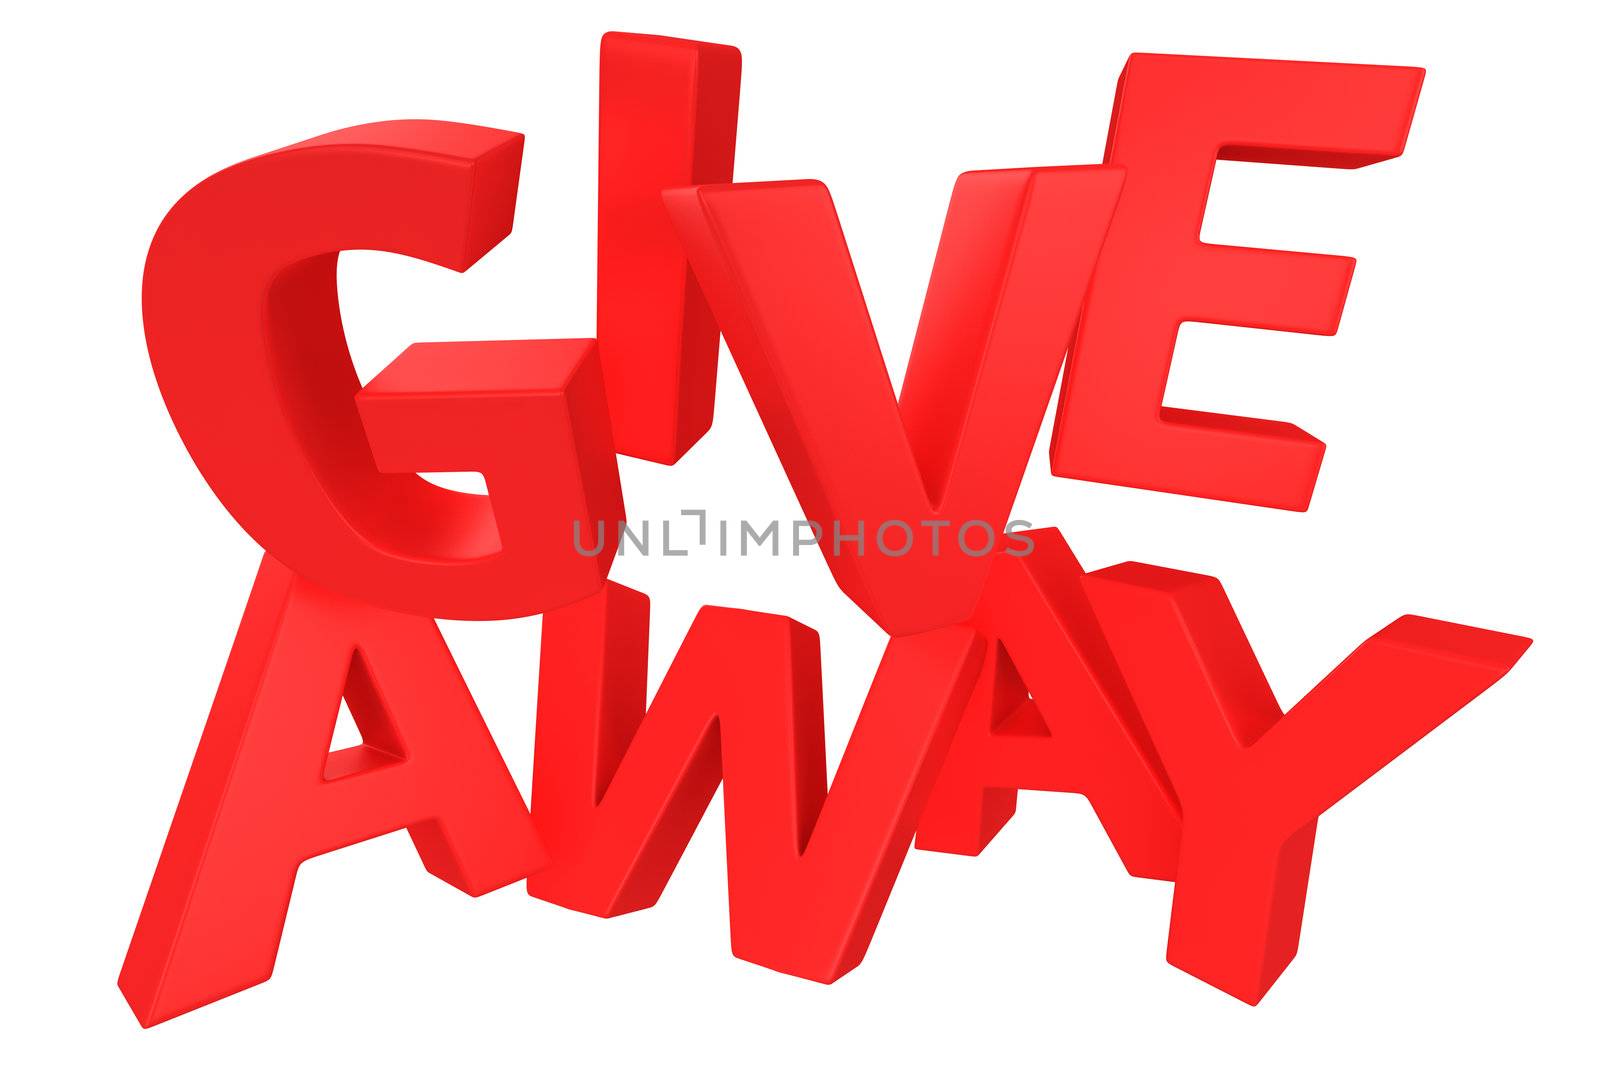 Word "Giveaway" made by red letters isolated on white